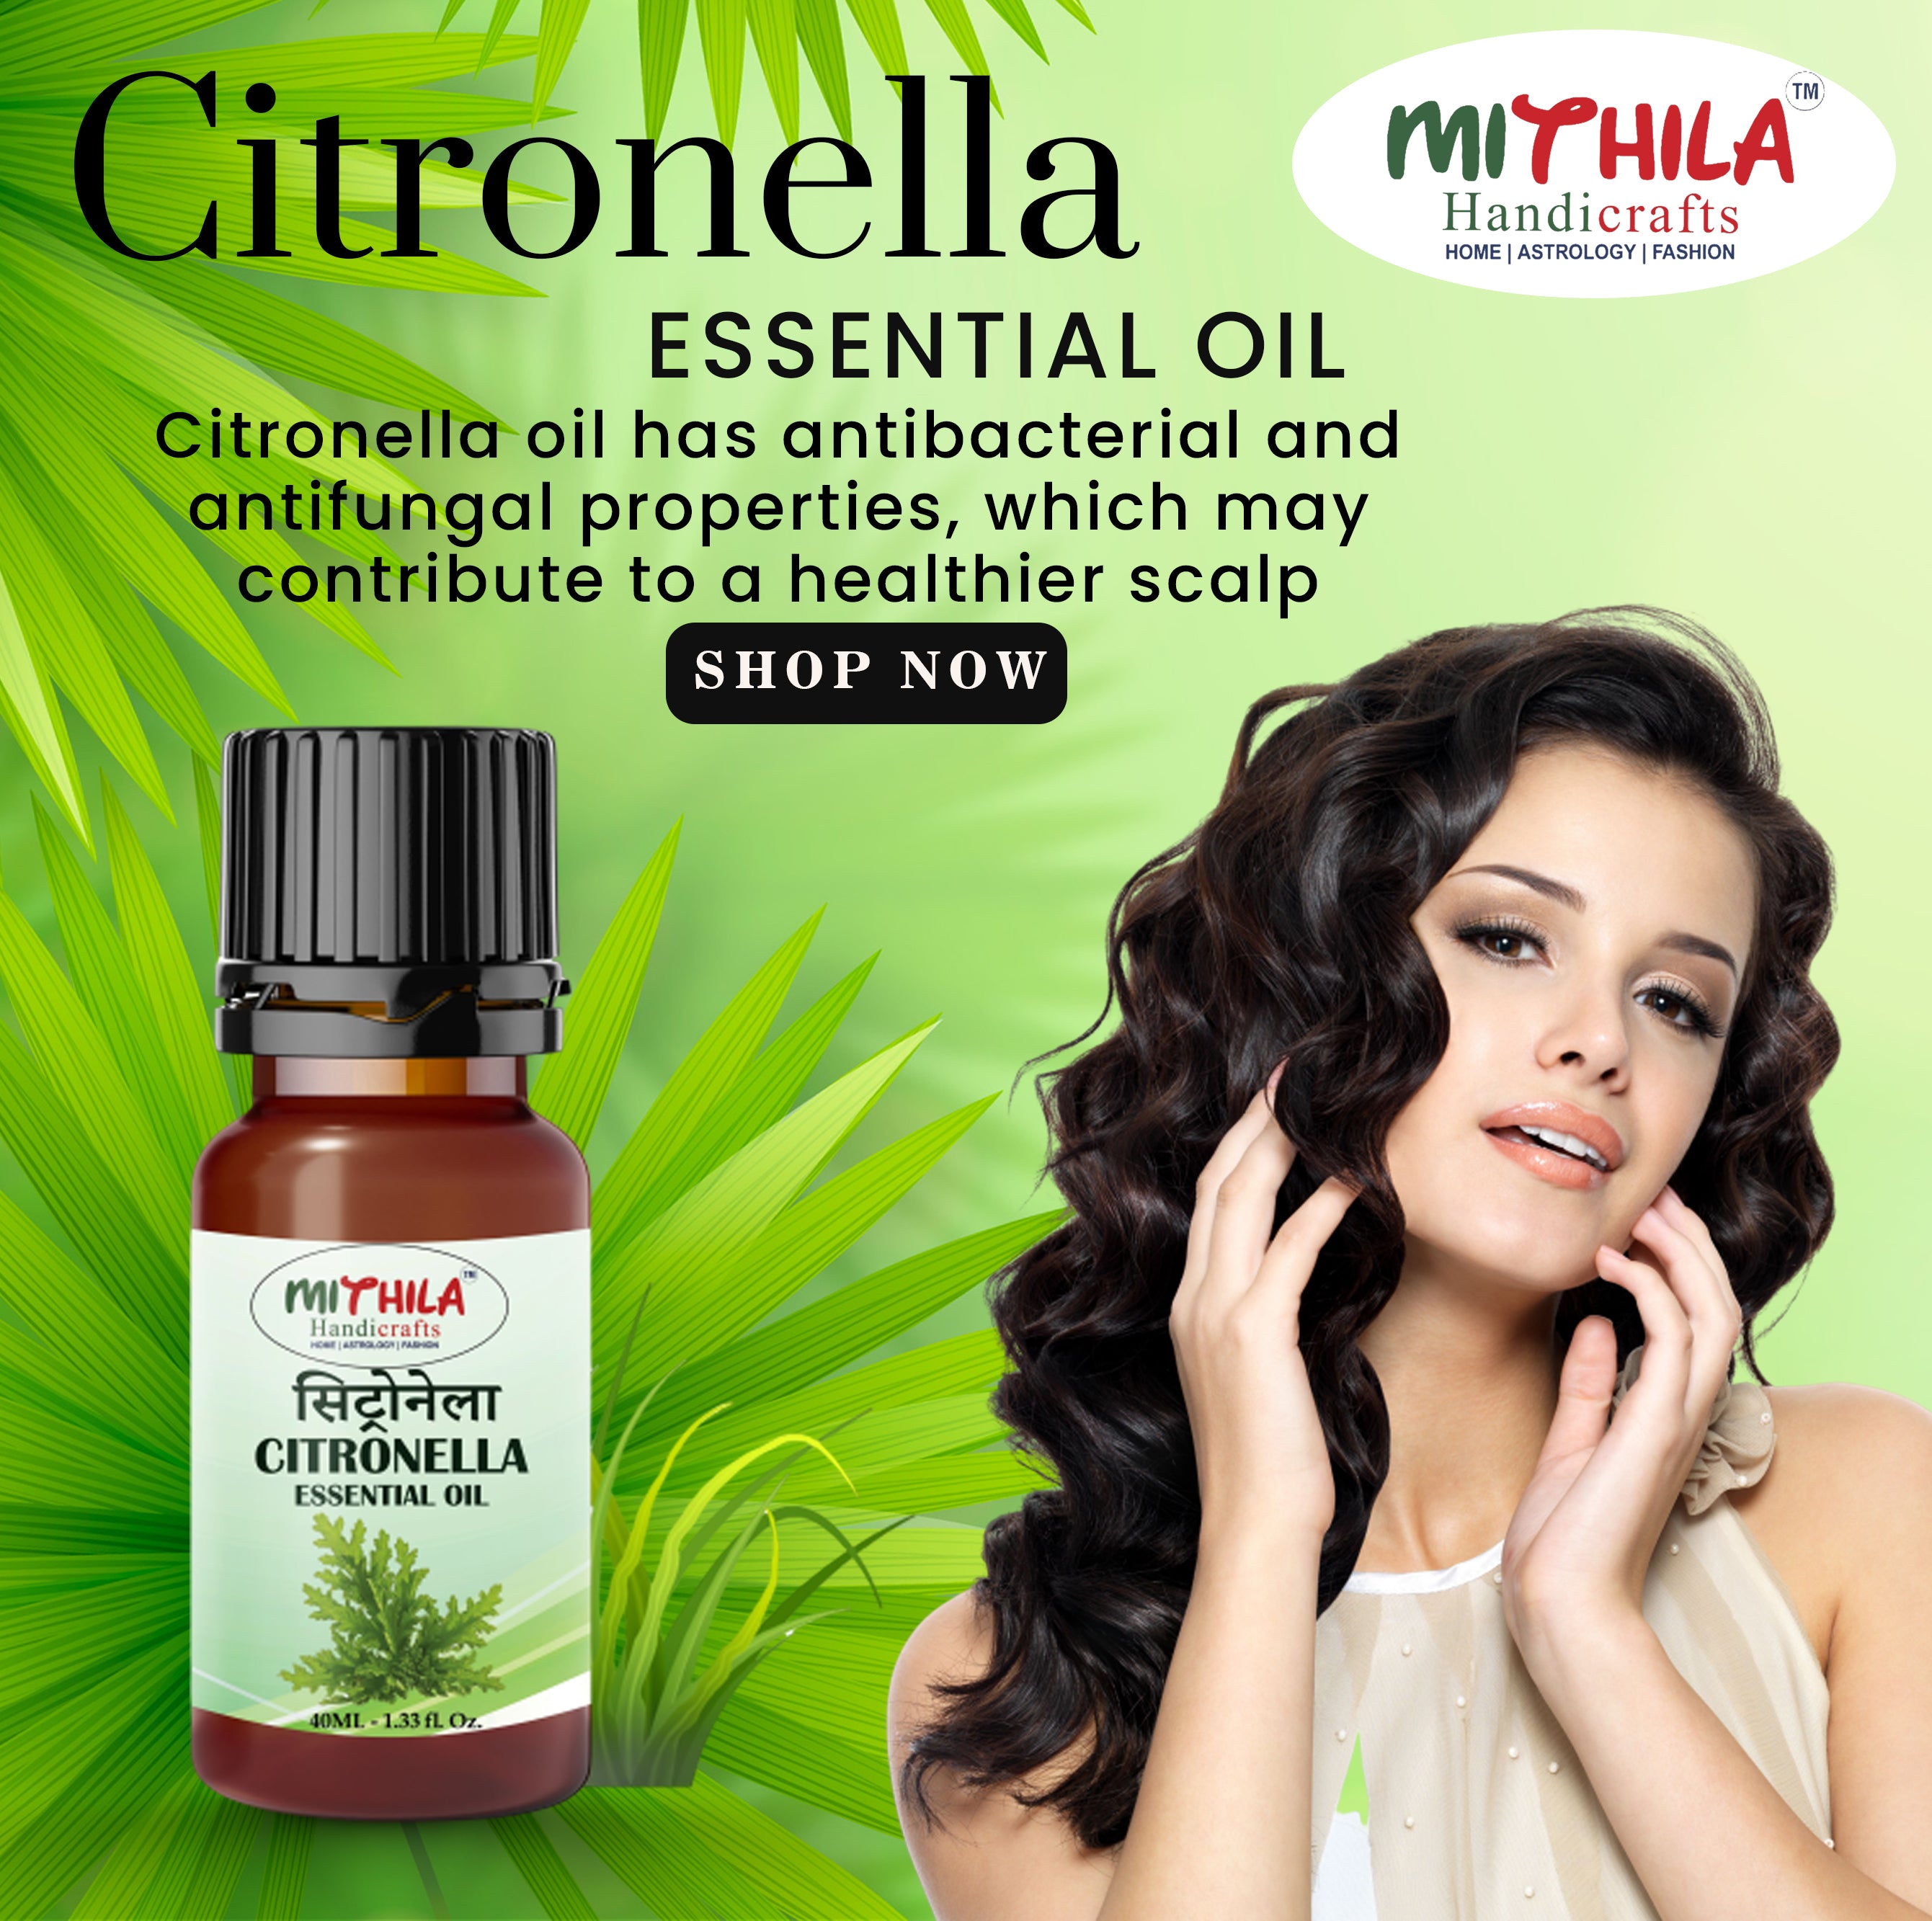 Citronella Essential Oil For Skin, Hair Care, Home Fragrance, Aroma Therapy 40ml